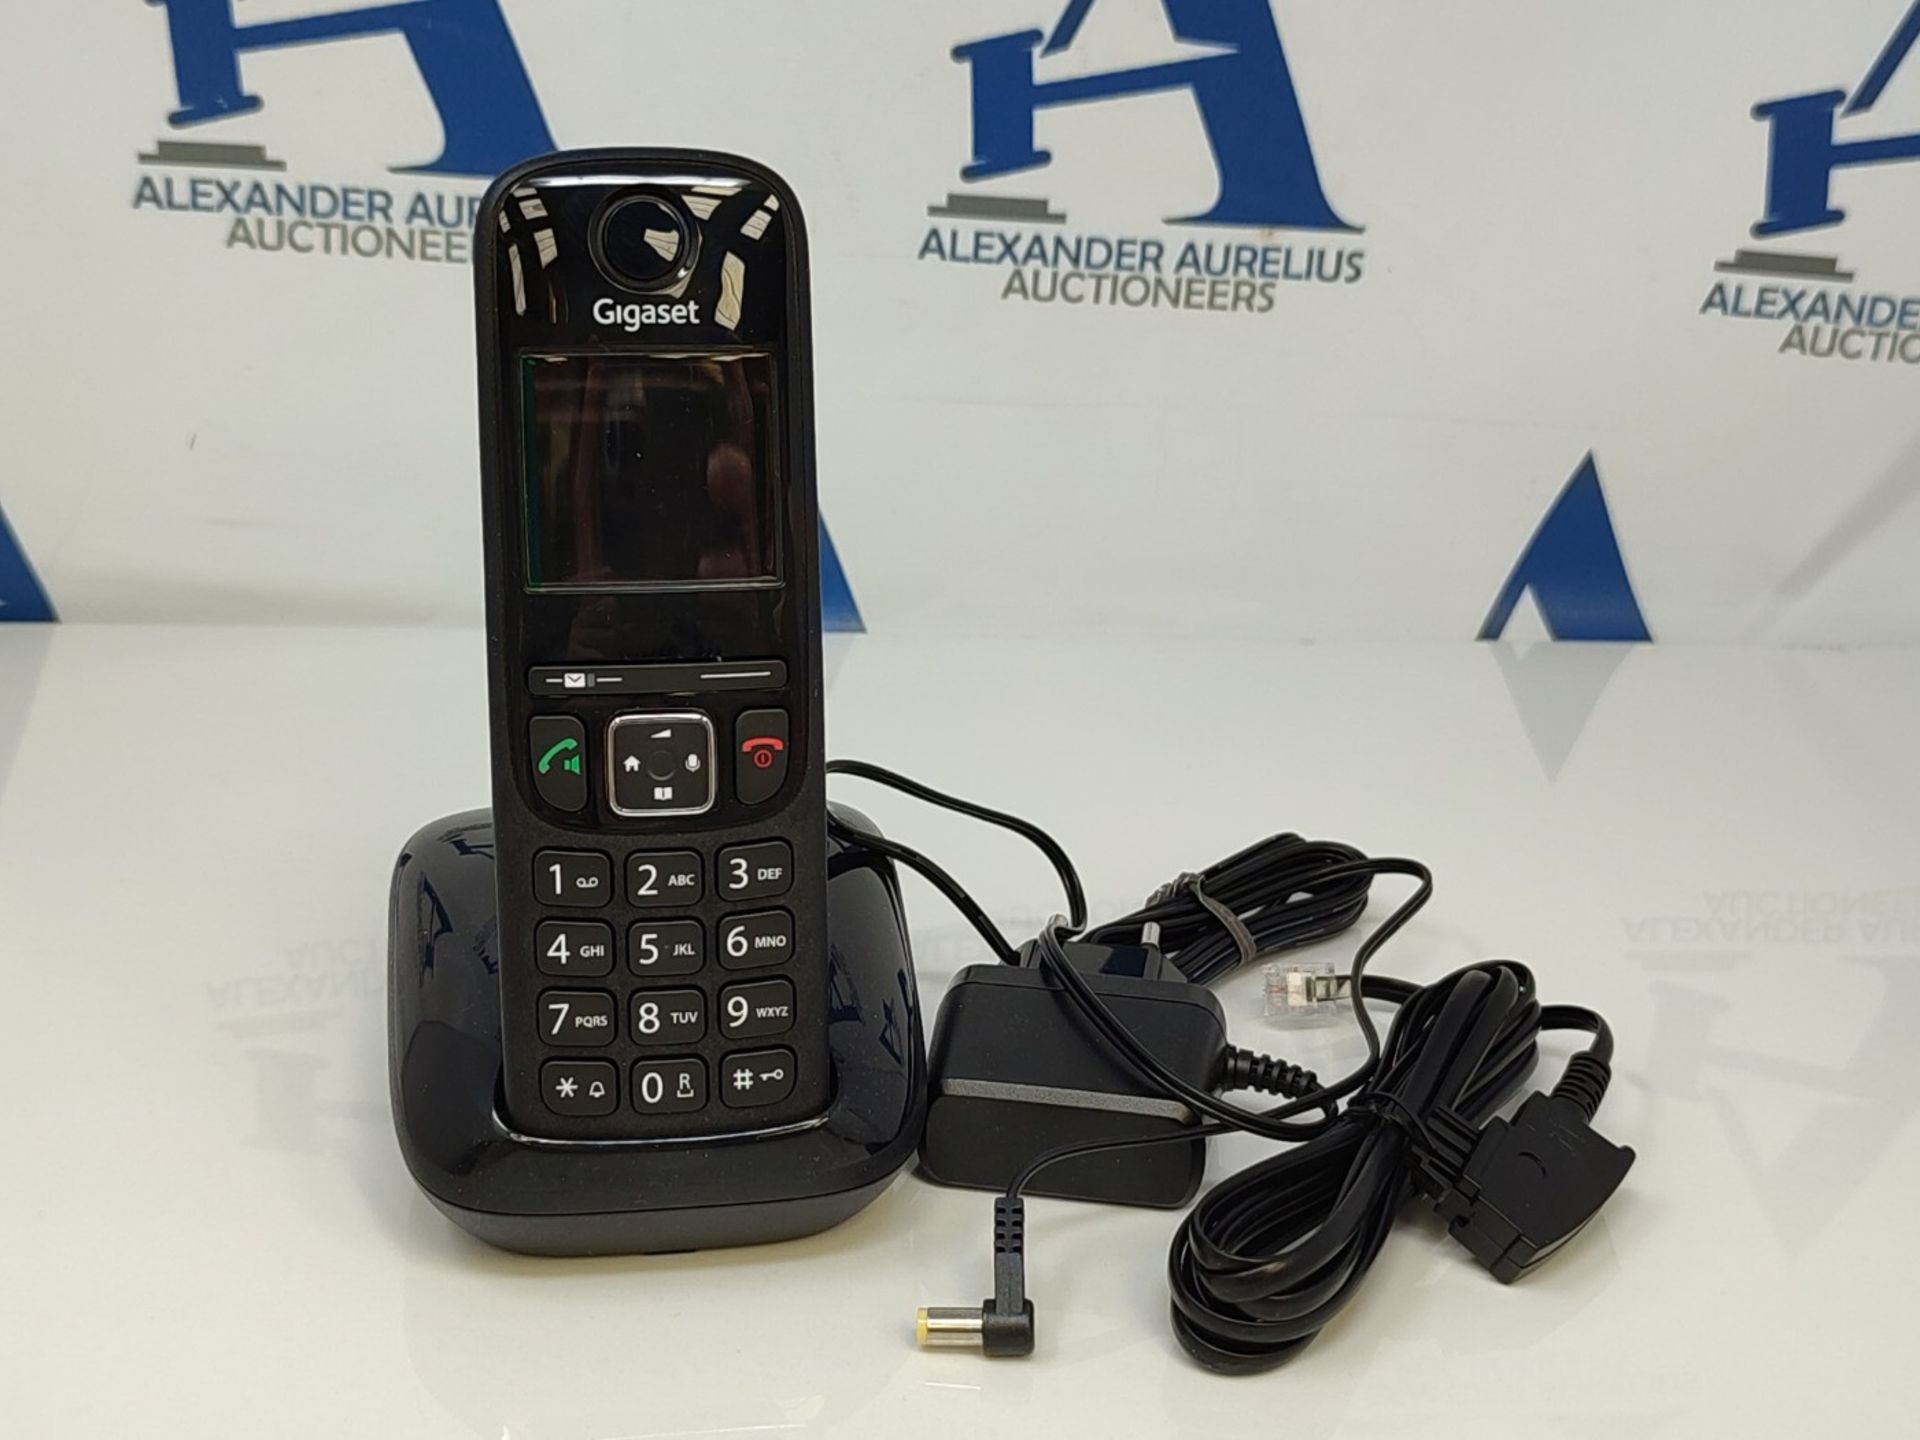 Gigaset AS690 - Cordless DECT Telephone - large, high-contrast display - brilliant aud - Image 6 of 6